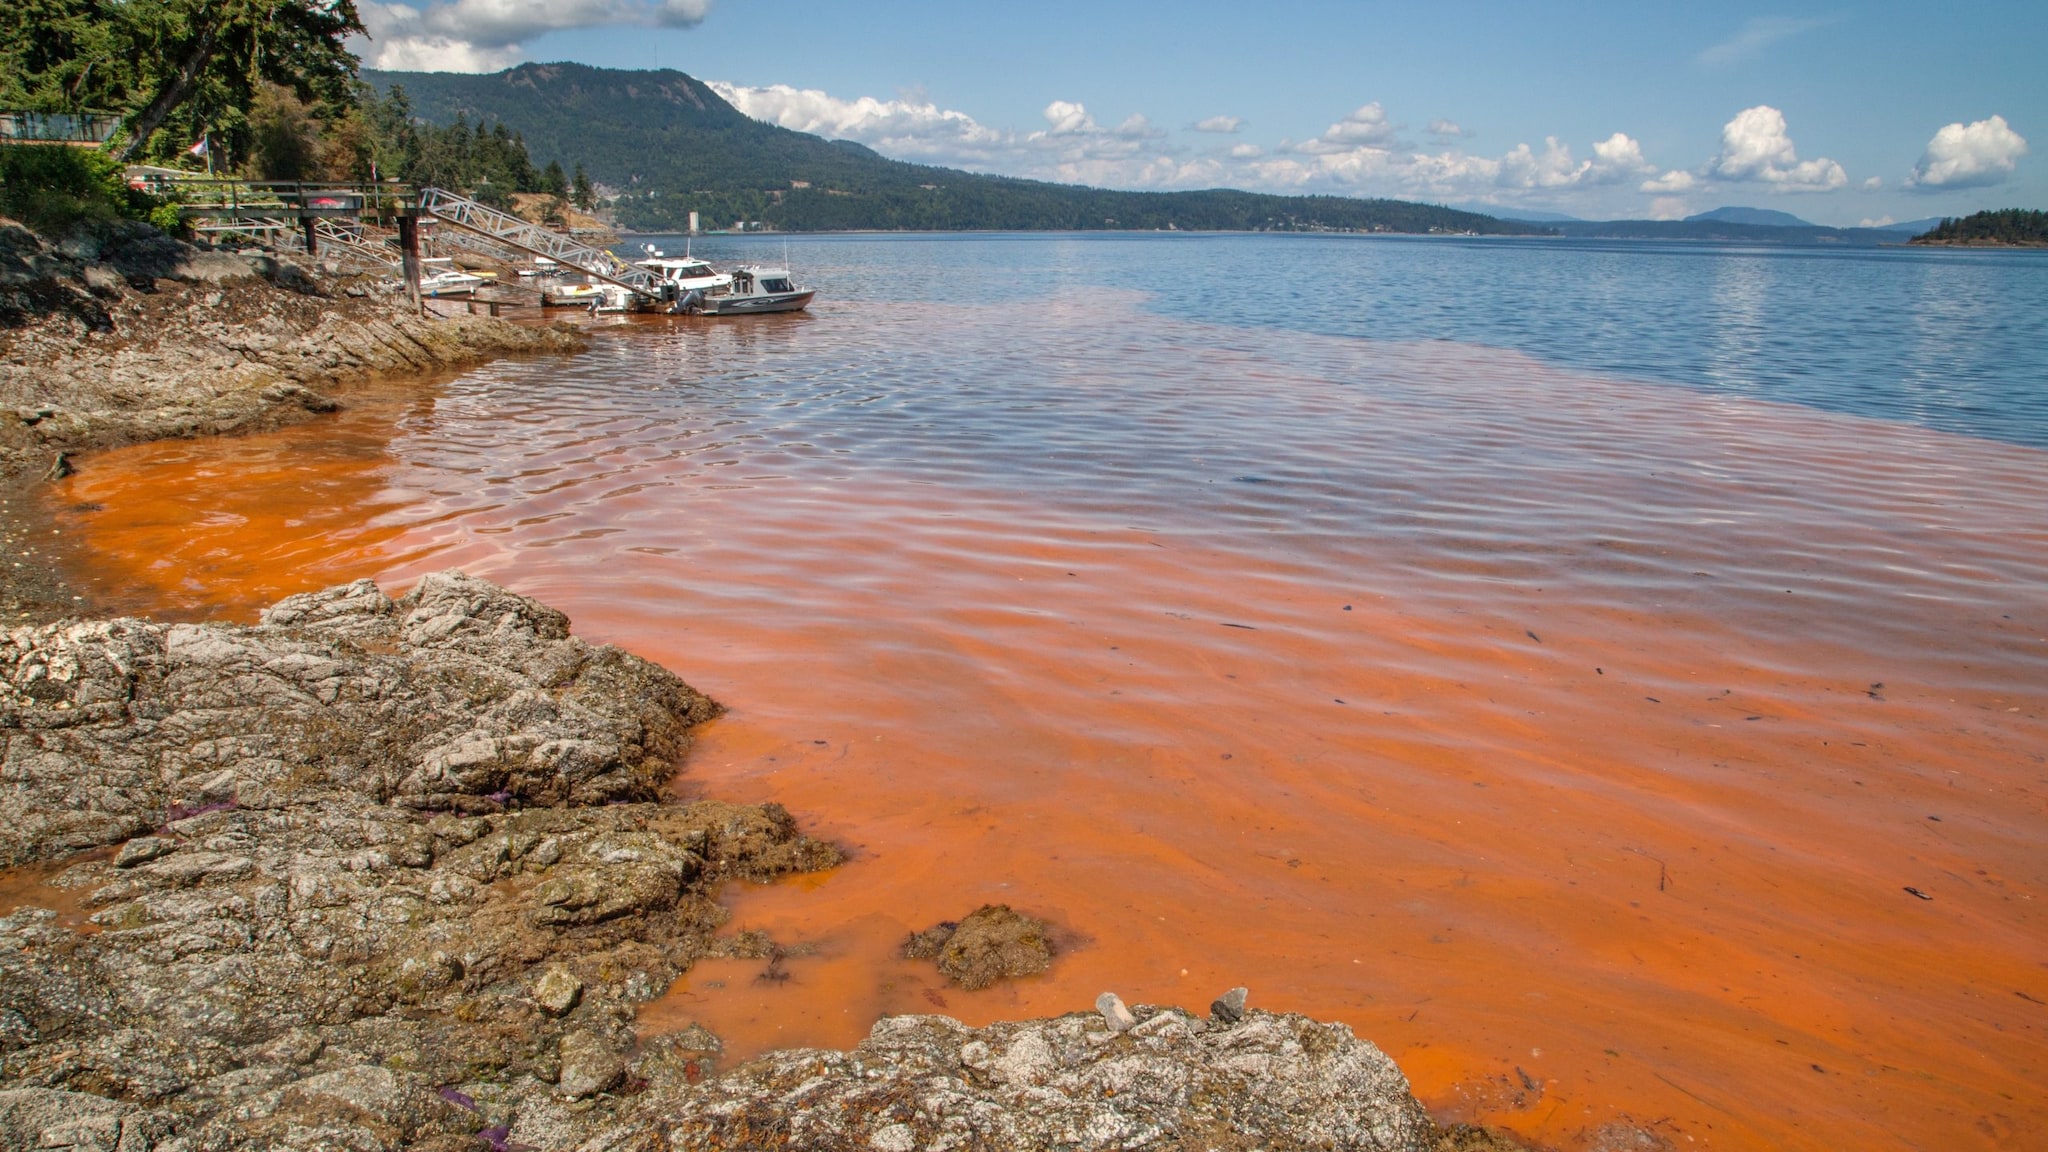 Red-orange water in a bay with a rocky shore